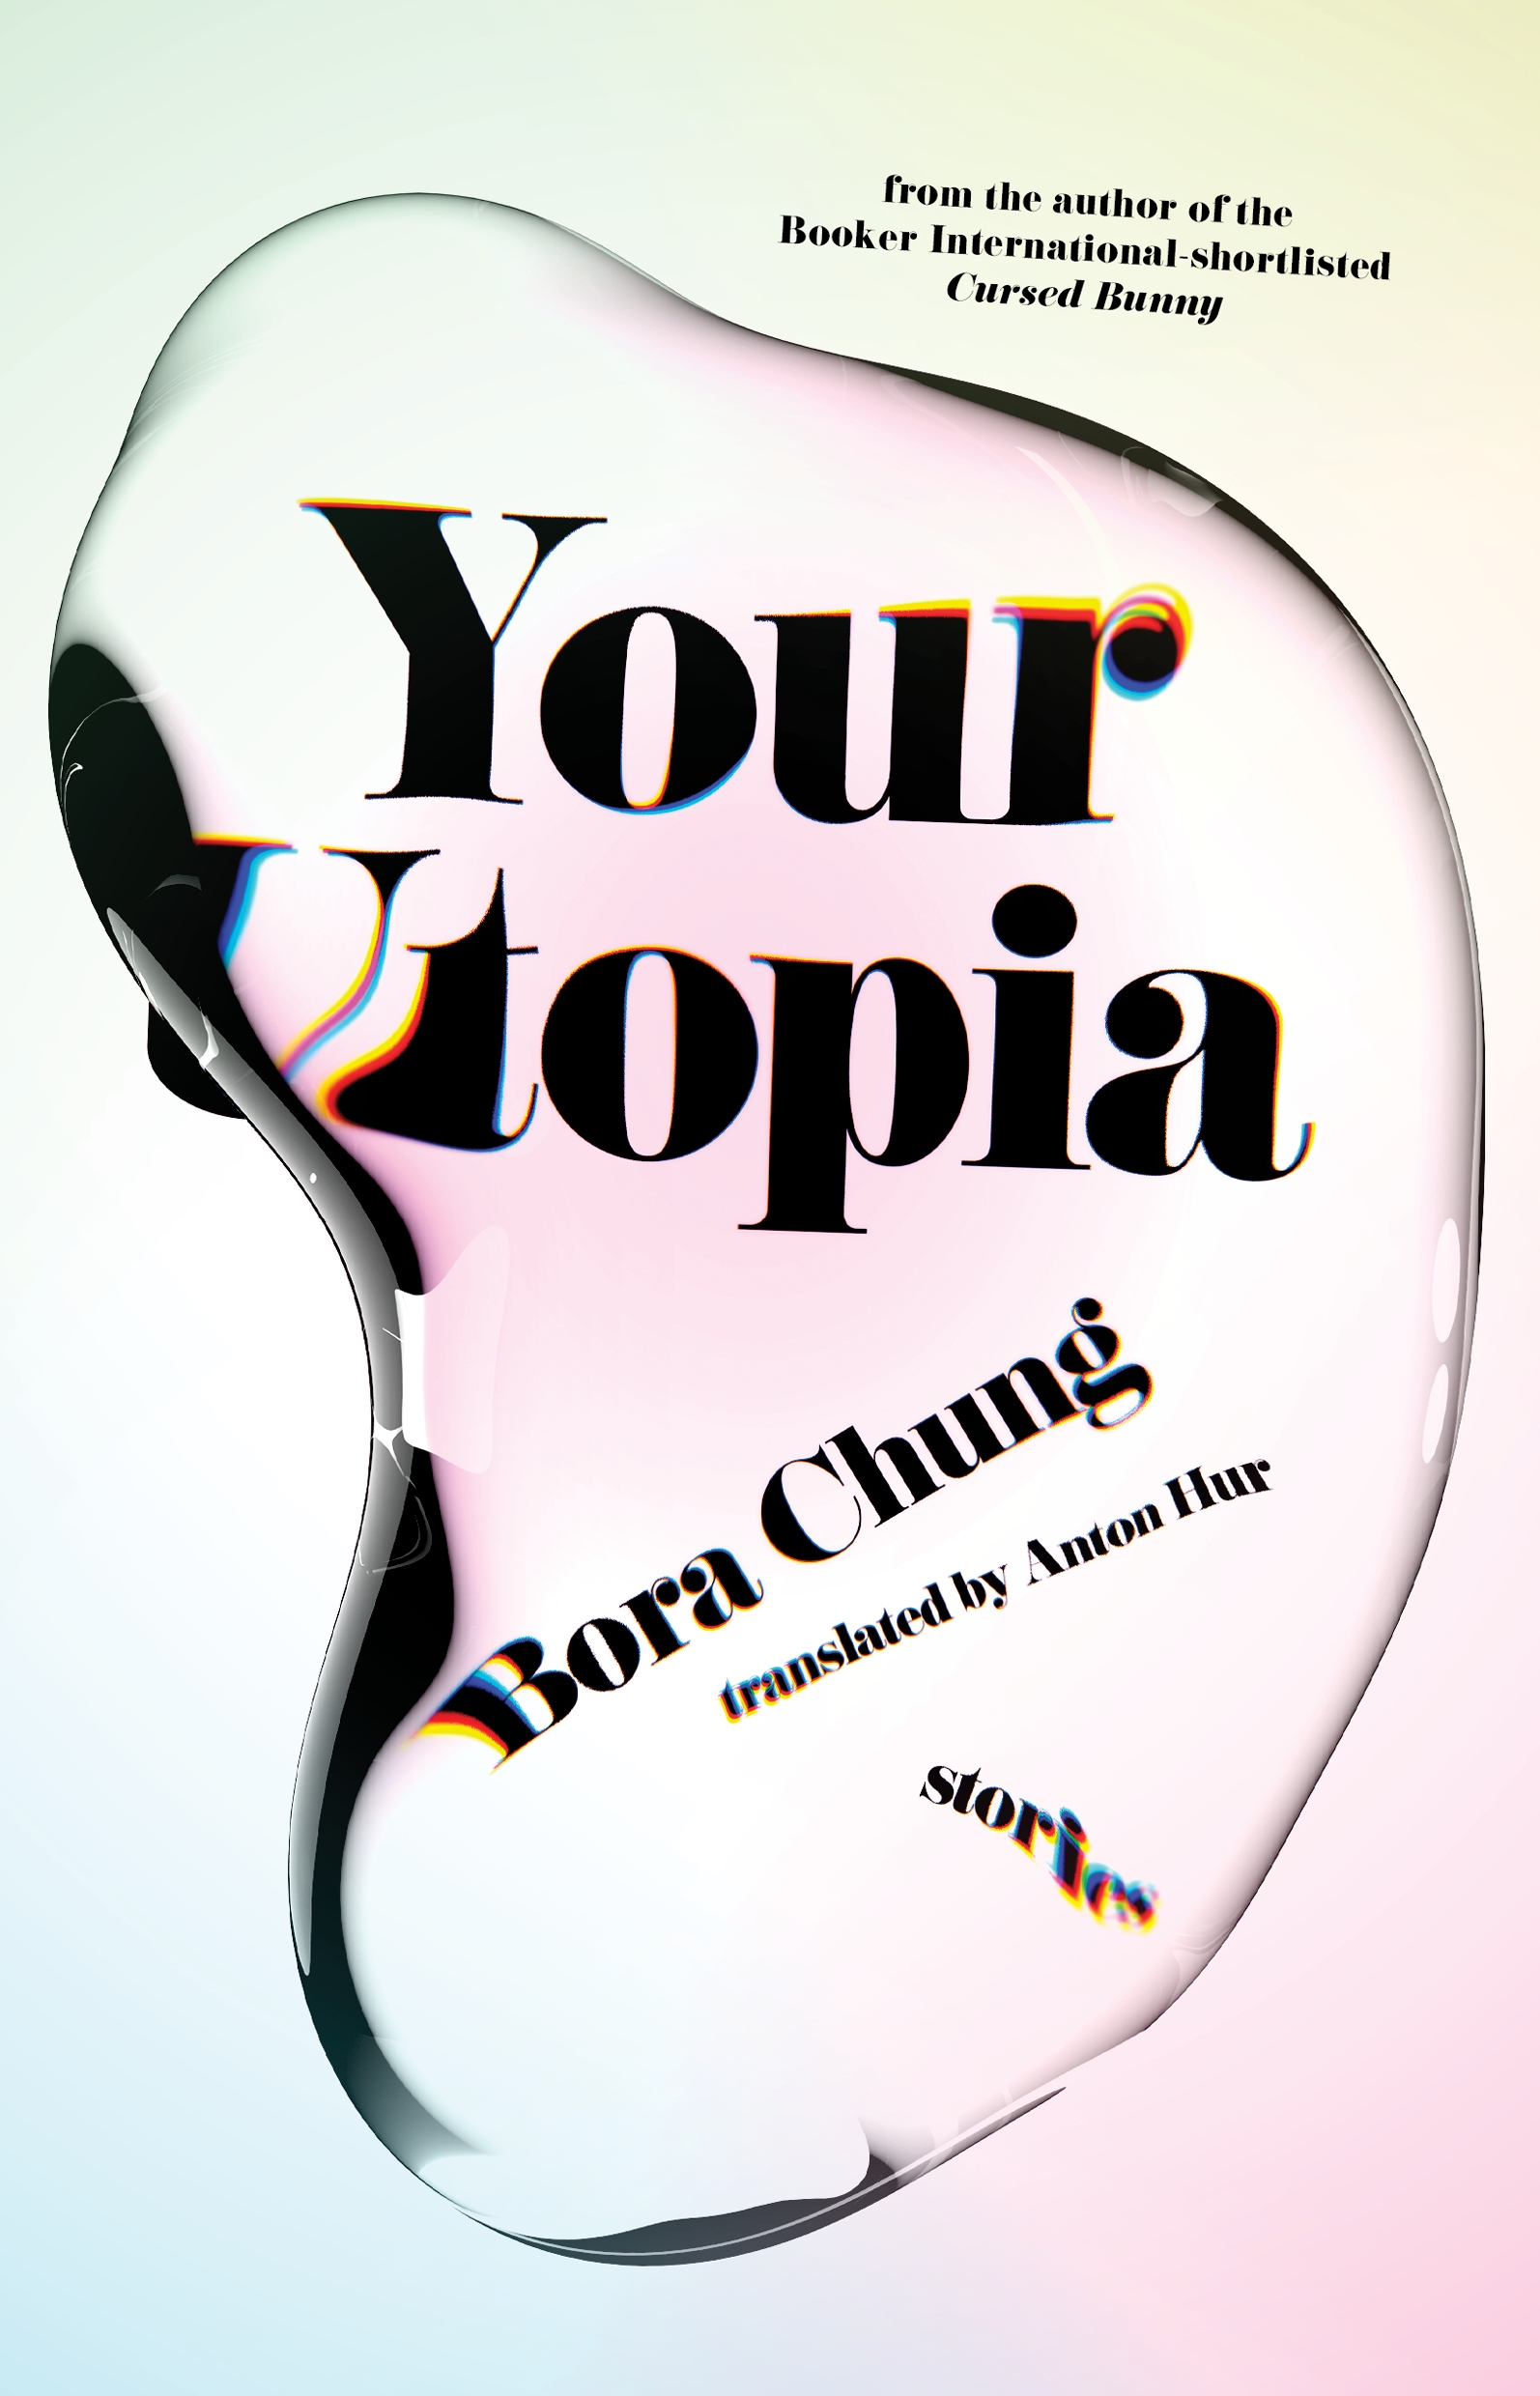 Your Utopia by Bora Chung